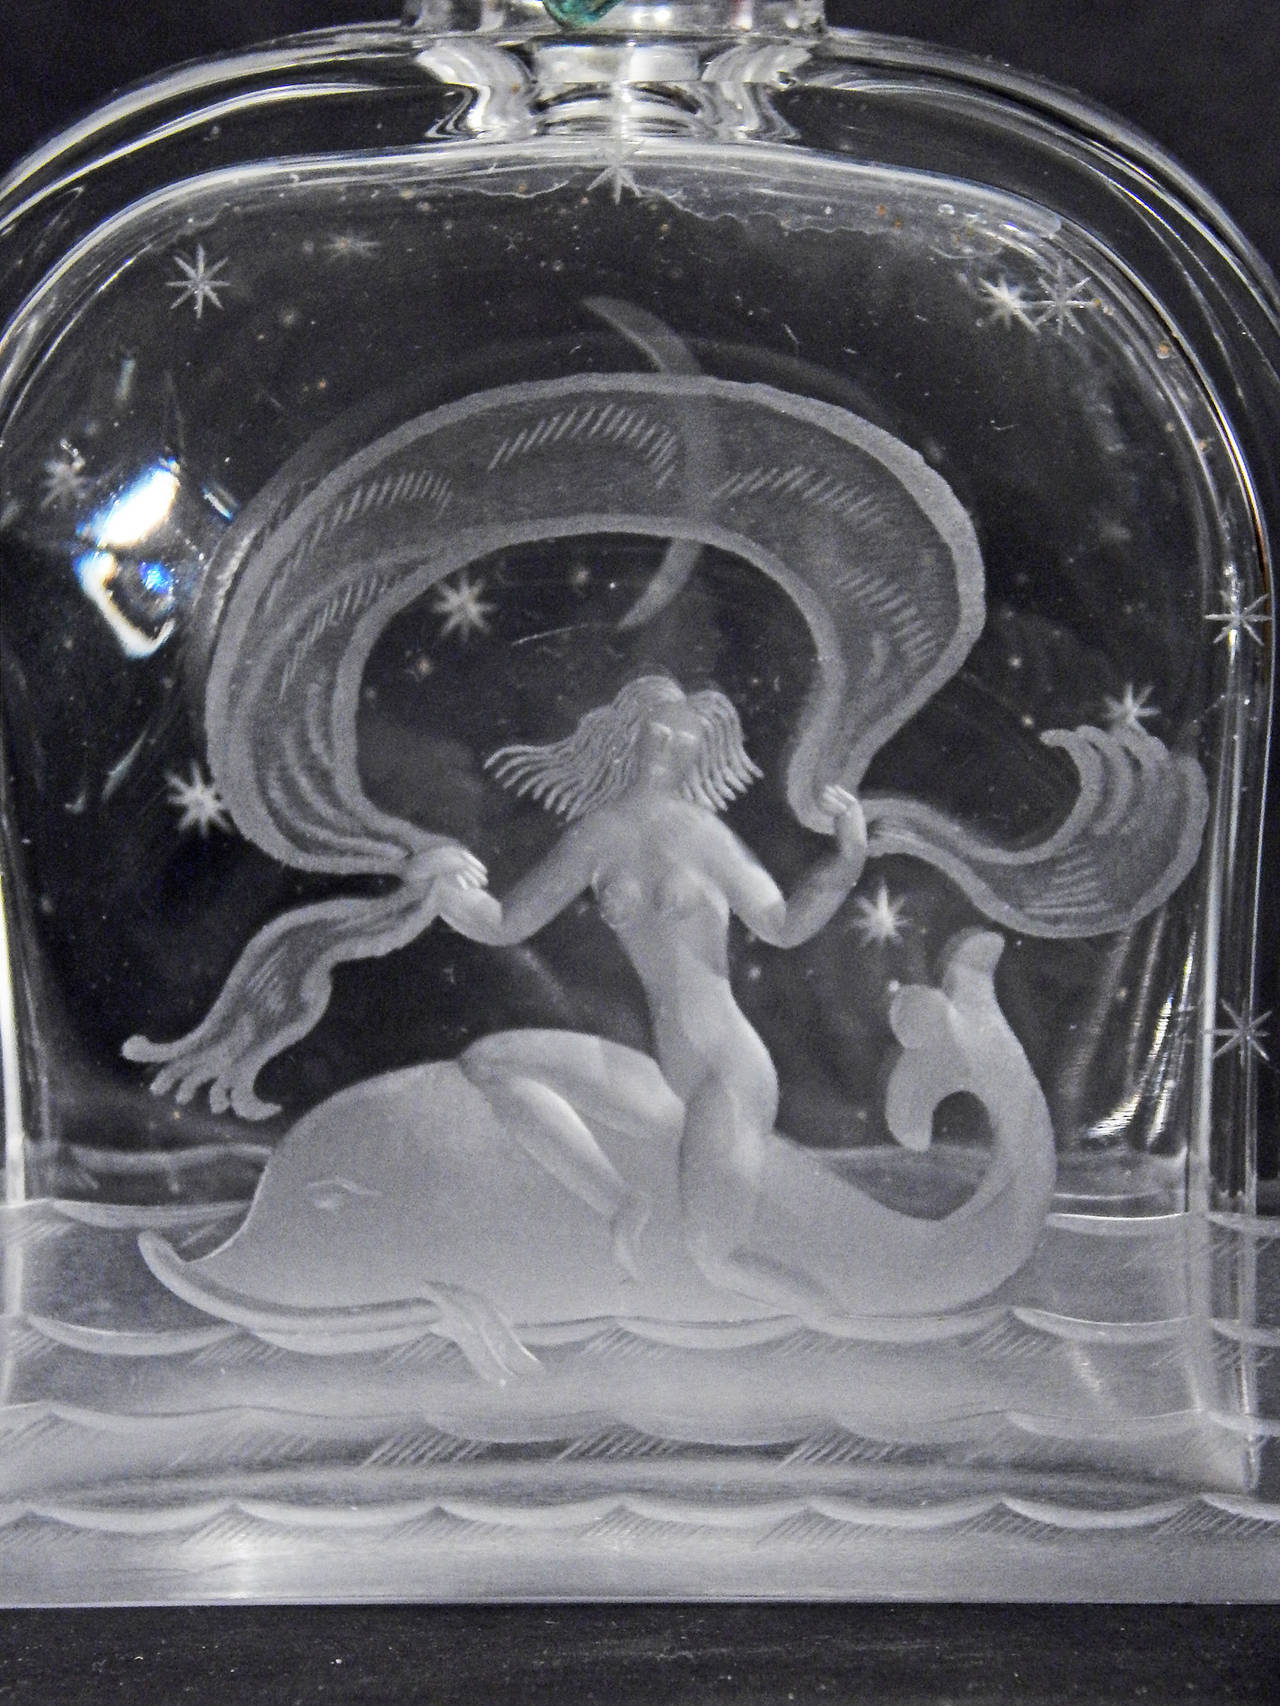 A tour de force of glass engraving, by the famed Orrefors glass company in Sweden, this perfume bottle depicts a nude mermaid riding a dolphin, holding a billowing length of drapery overhead. The Orrefors designer and engravers missed no detail,